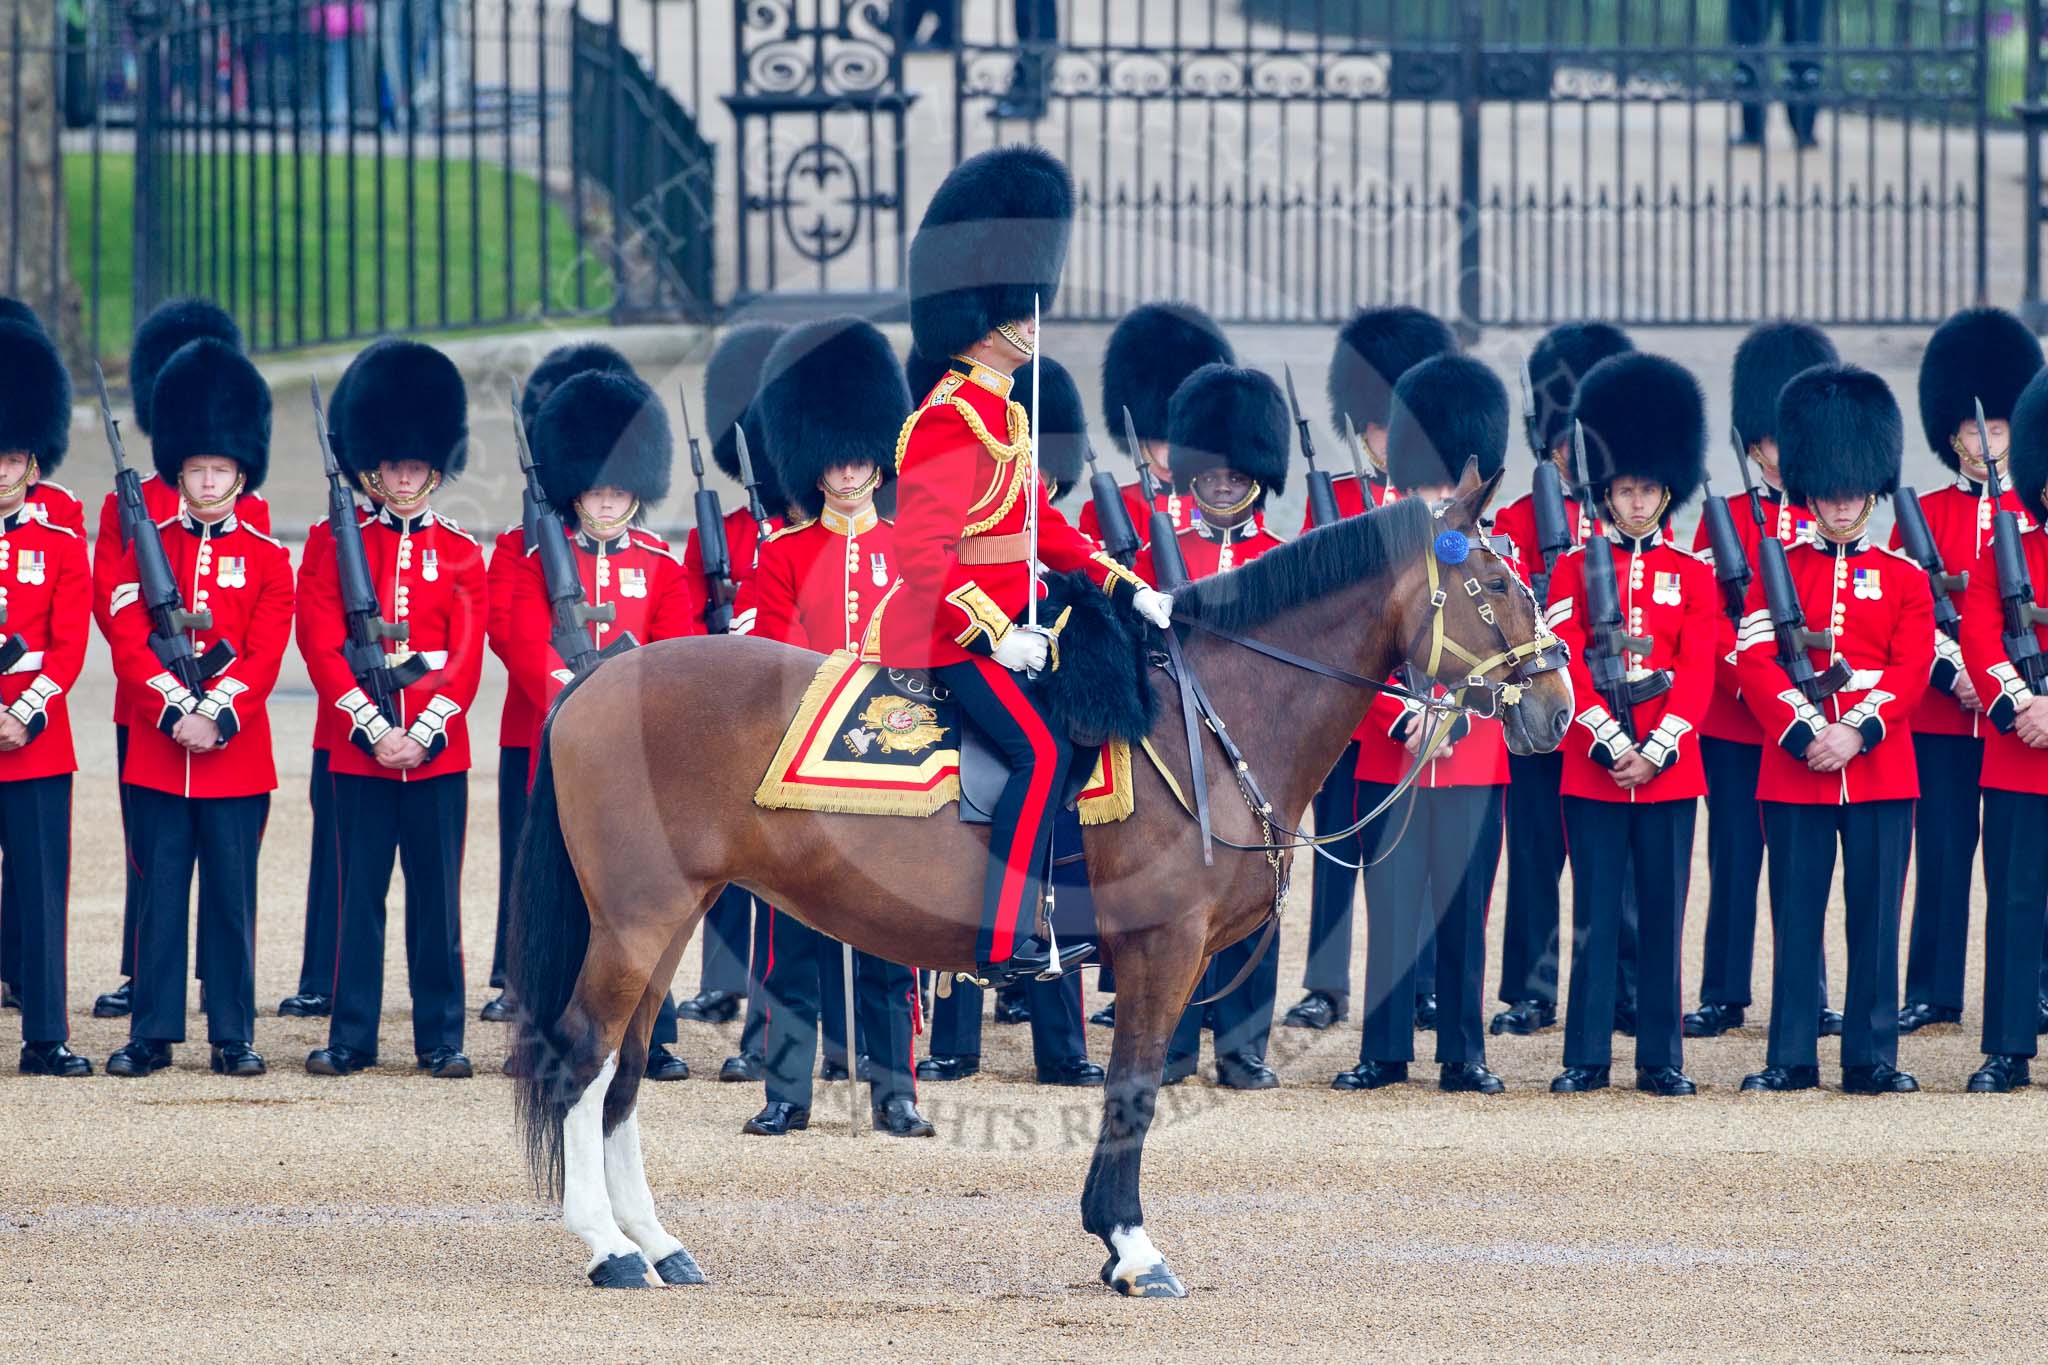 Trooping the Colour 2011: The Field Officer in Brigade Waiting, Lieutenant Colonel Lincoln P M Jopp, riding Burniston, the 'parade expert' horse of the Royal Mews. Behind him No. 2 Guard, B Company Scots Guards..
Horse Guards Parade, Westminster,
London SW1,
Greater London,
United Kingdom,
on 11 June 2011 at 10:47, image #79